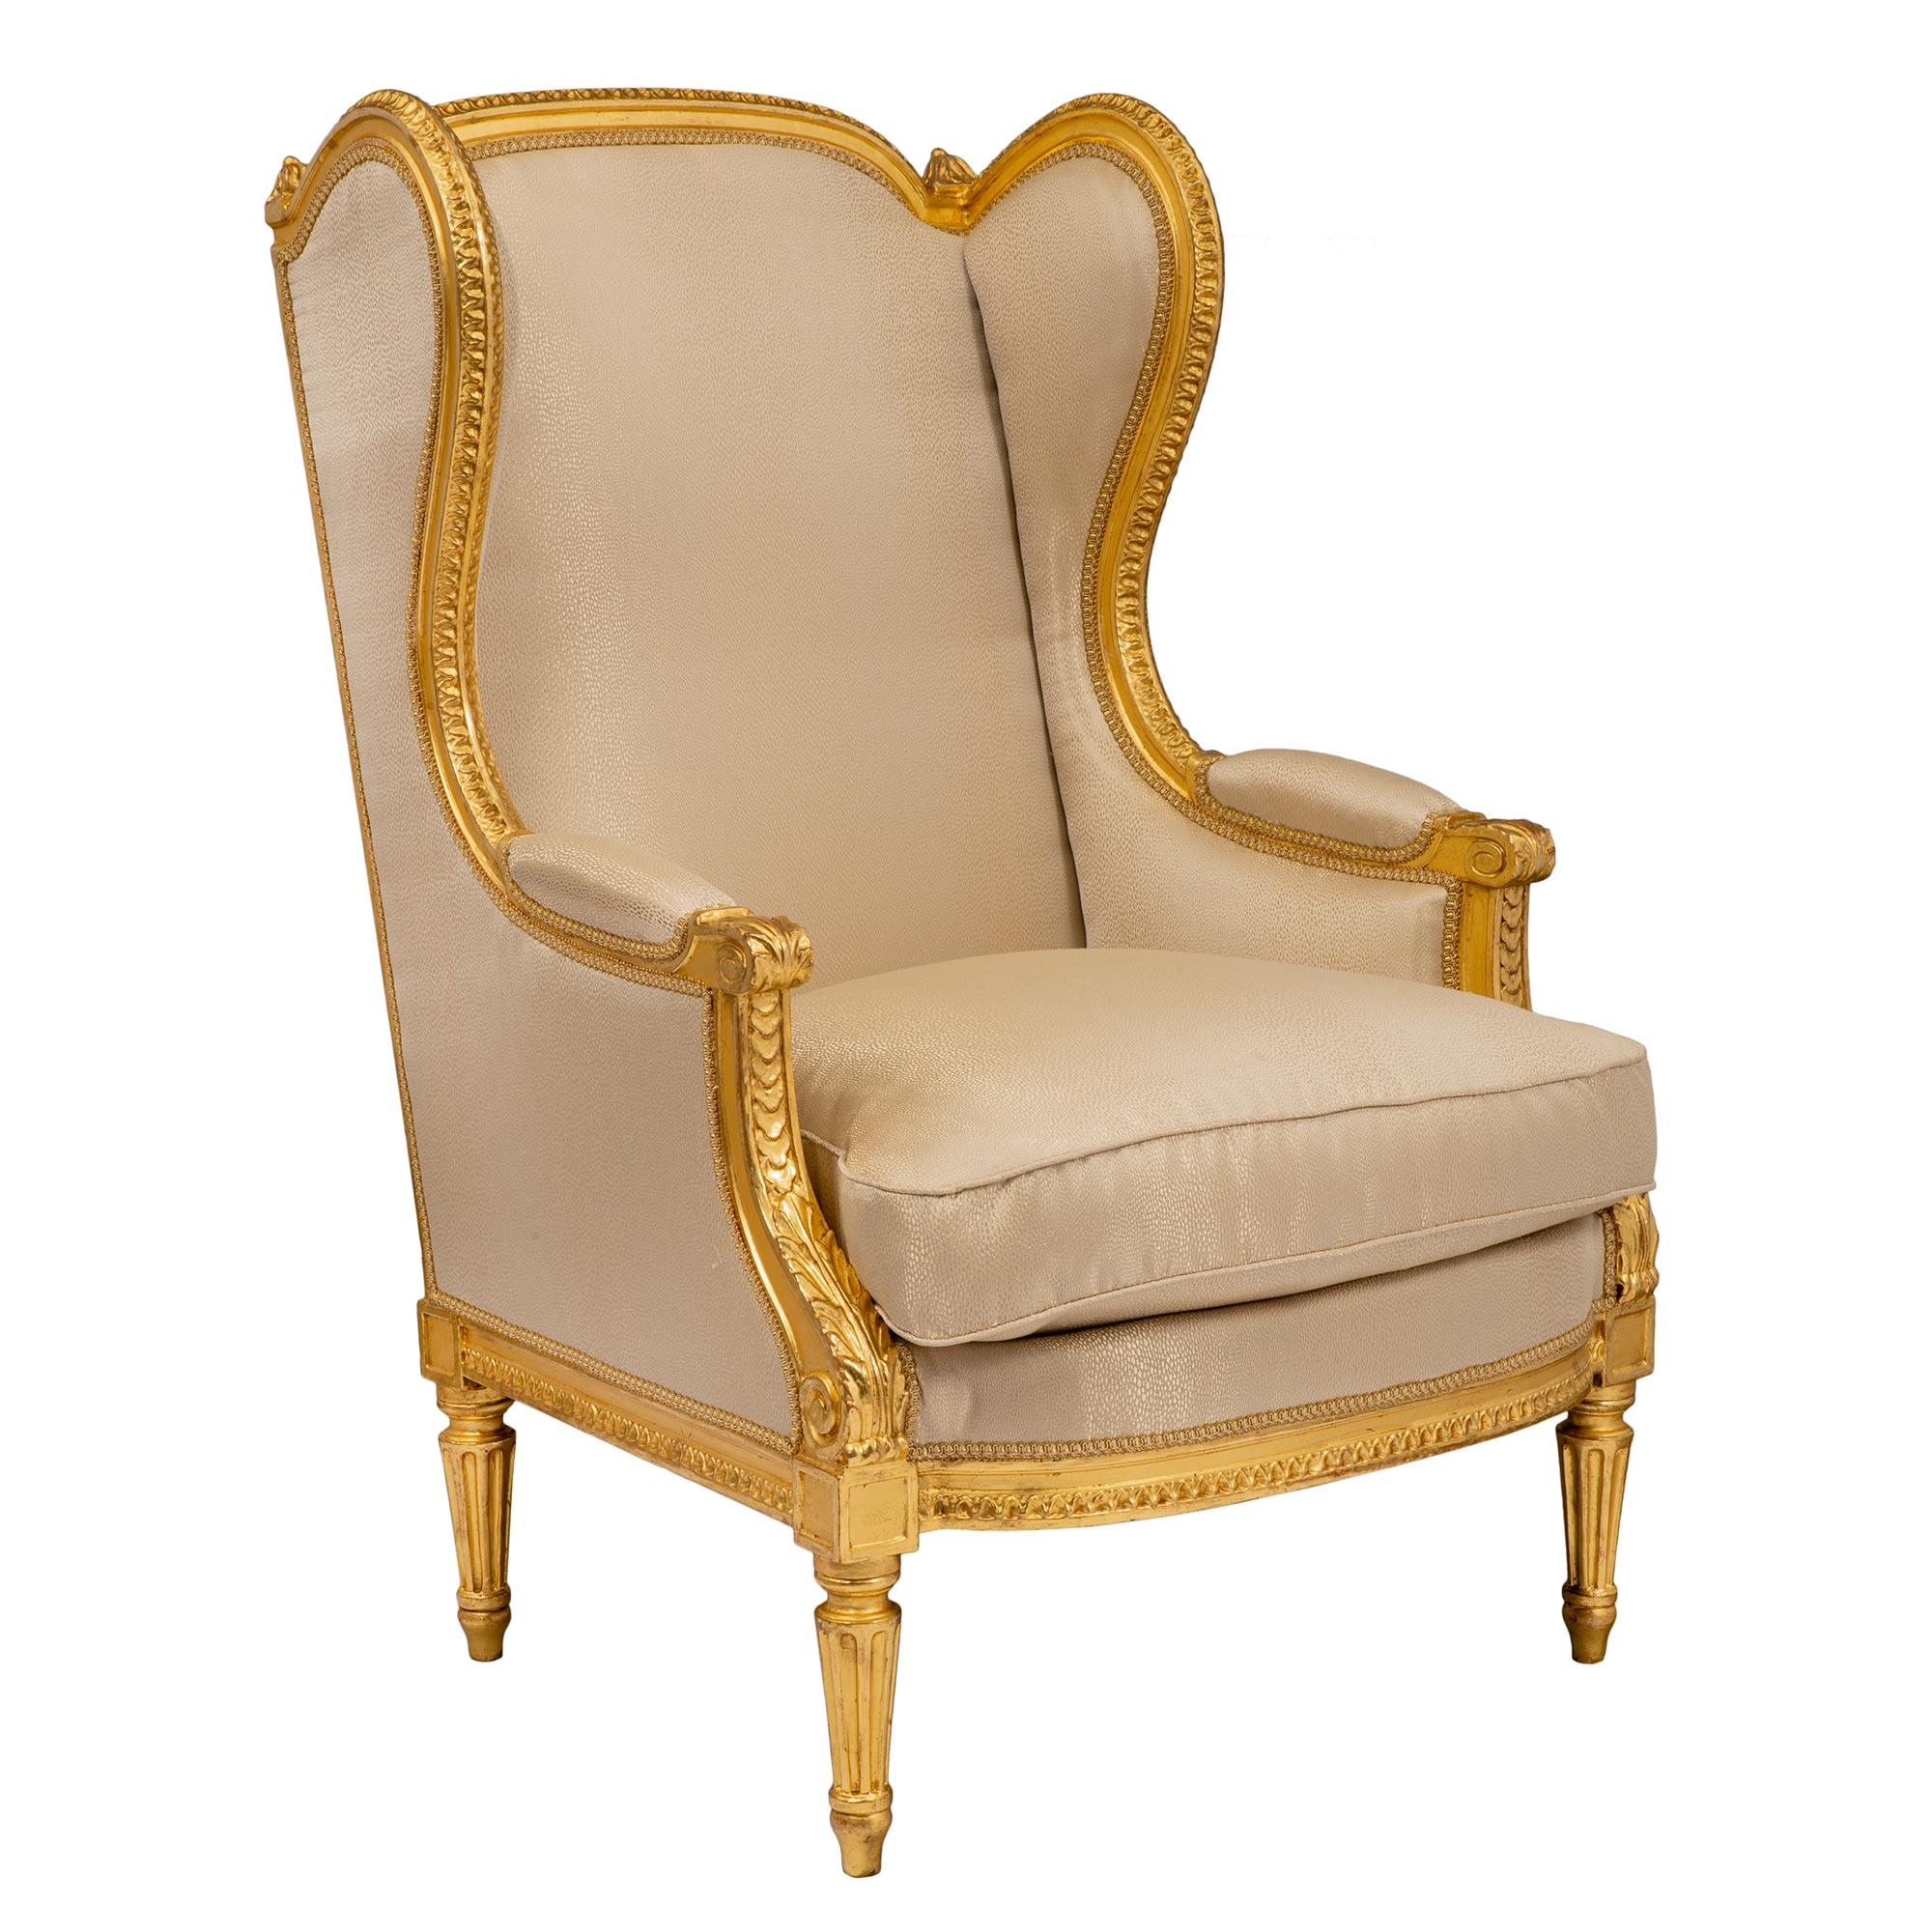 A handsome pair of French mid 19th century Louis XV st. giltwood 